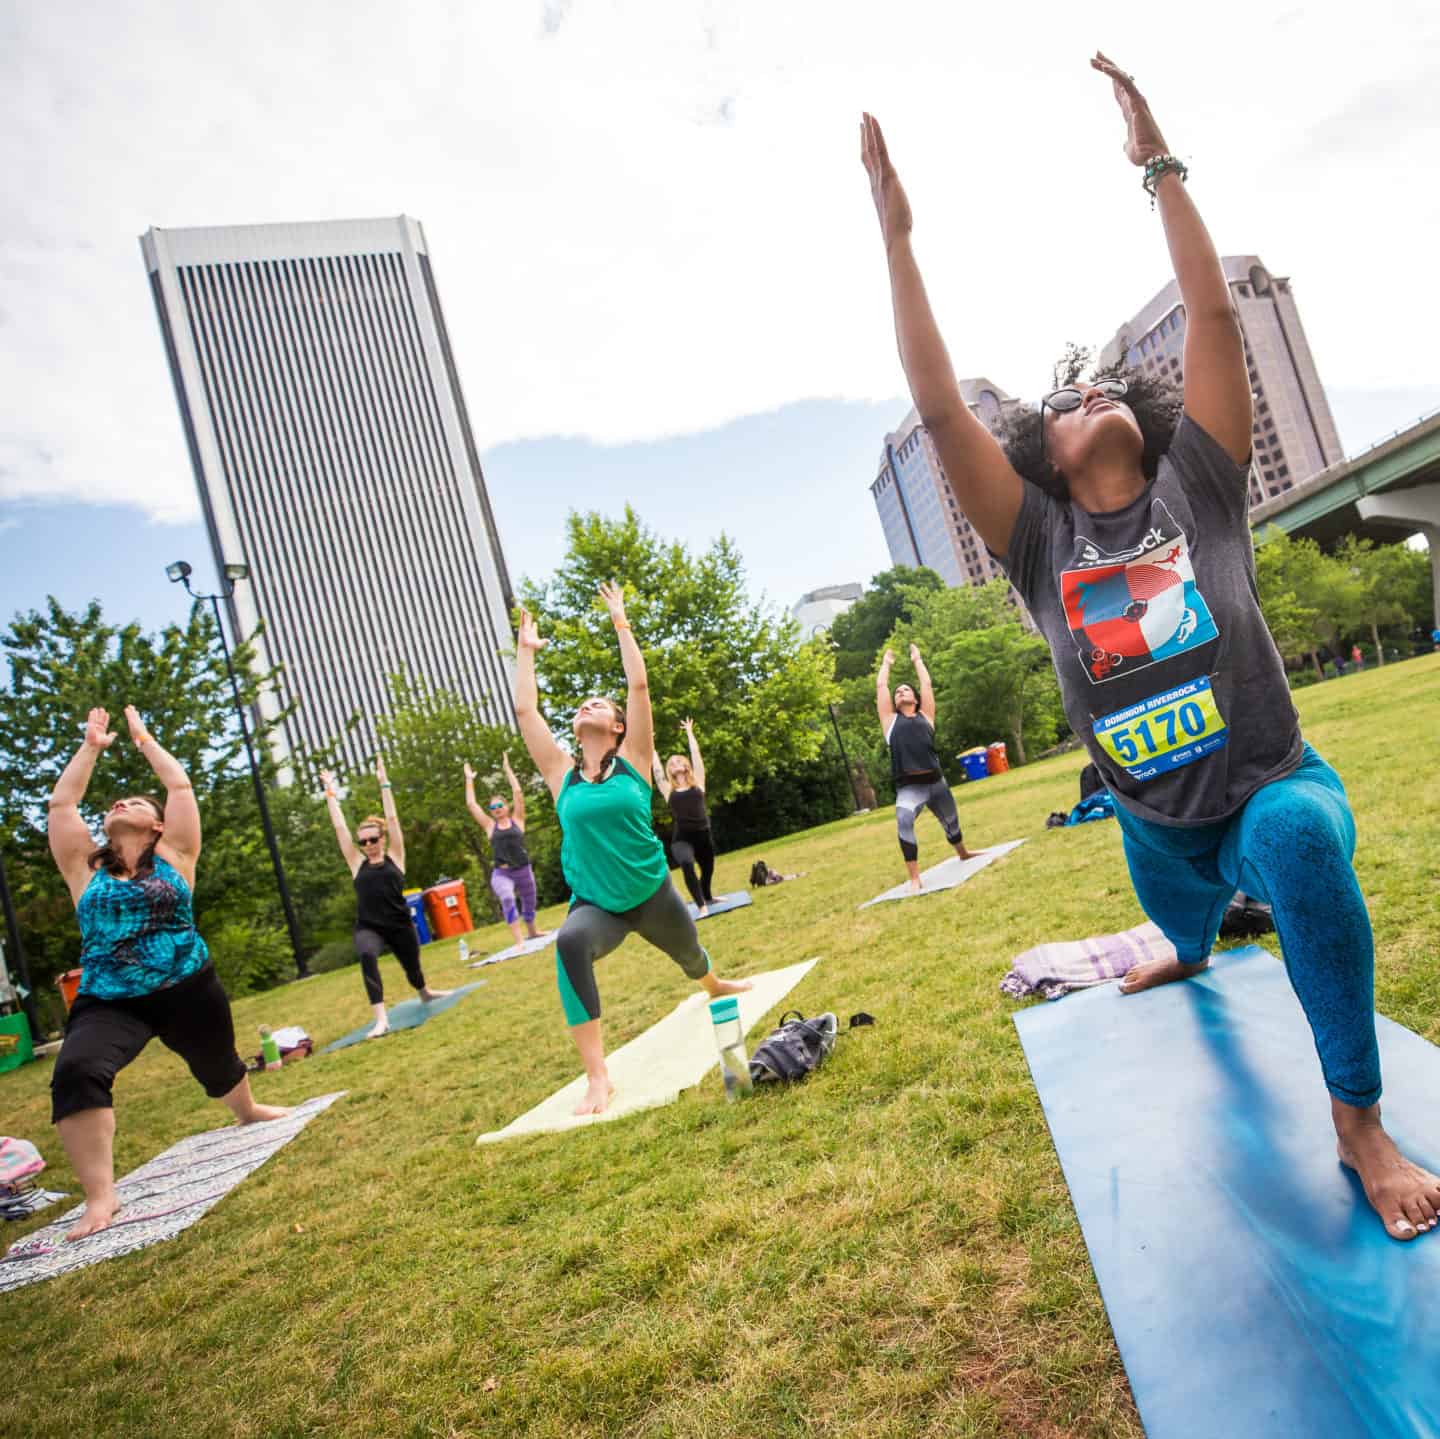 outdoor yoga. Woman in foreground in warrior 1 pose.